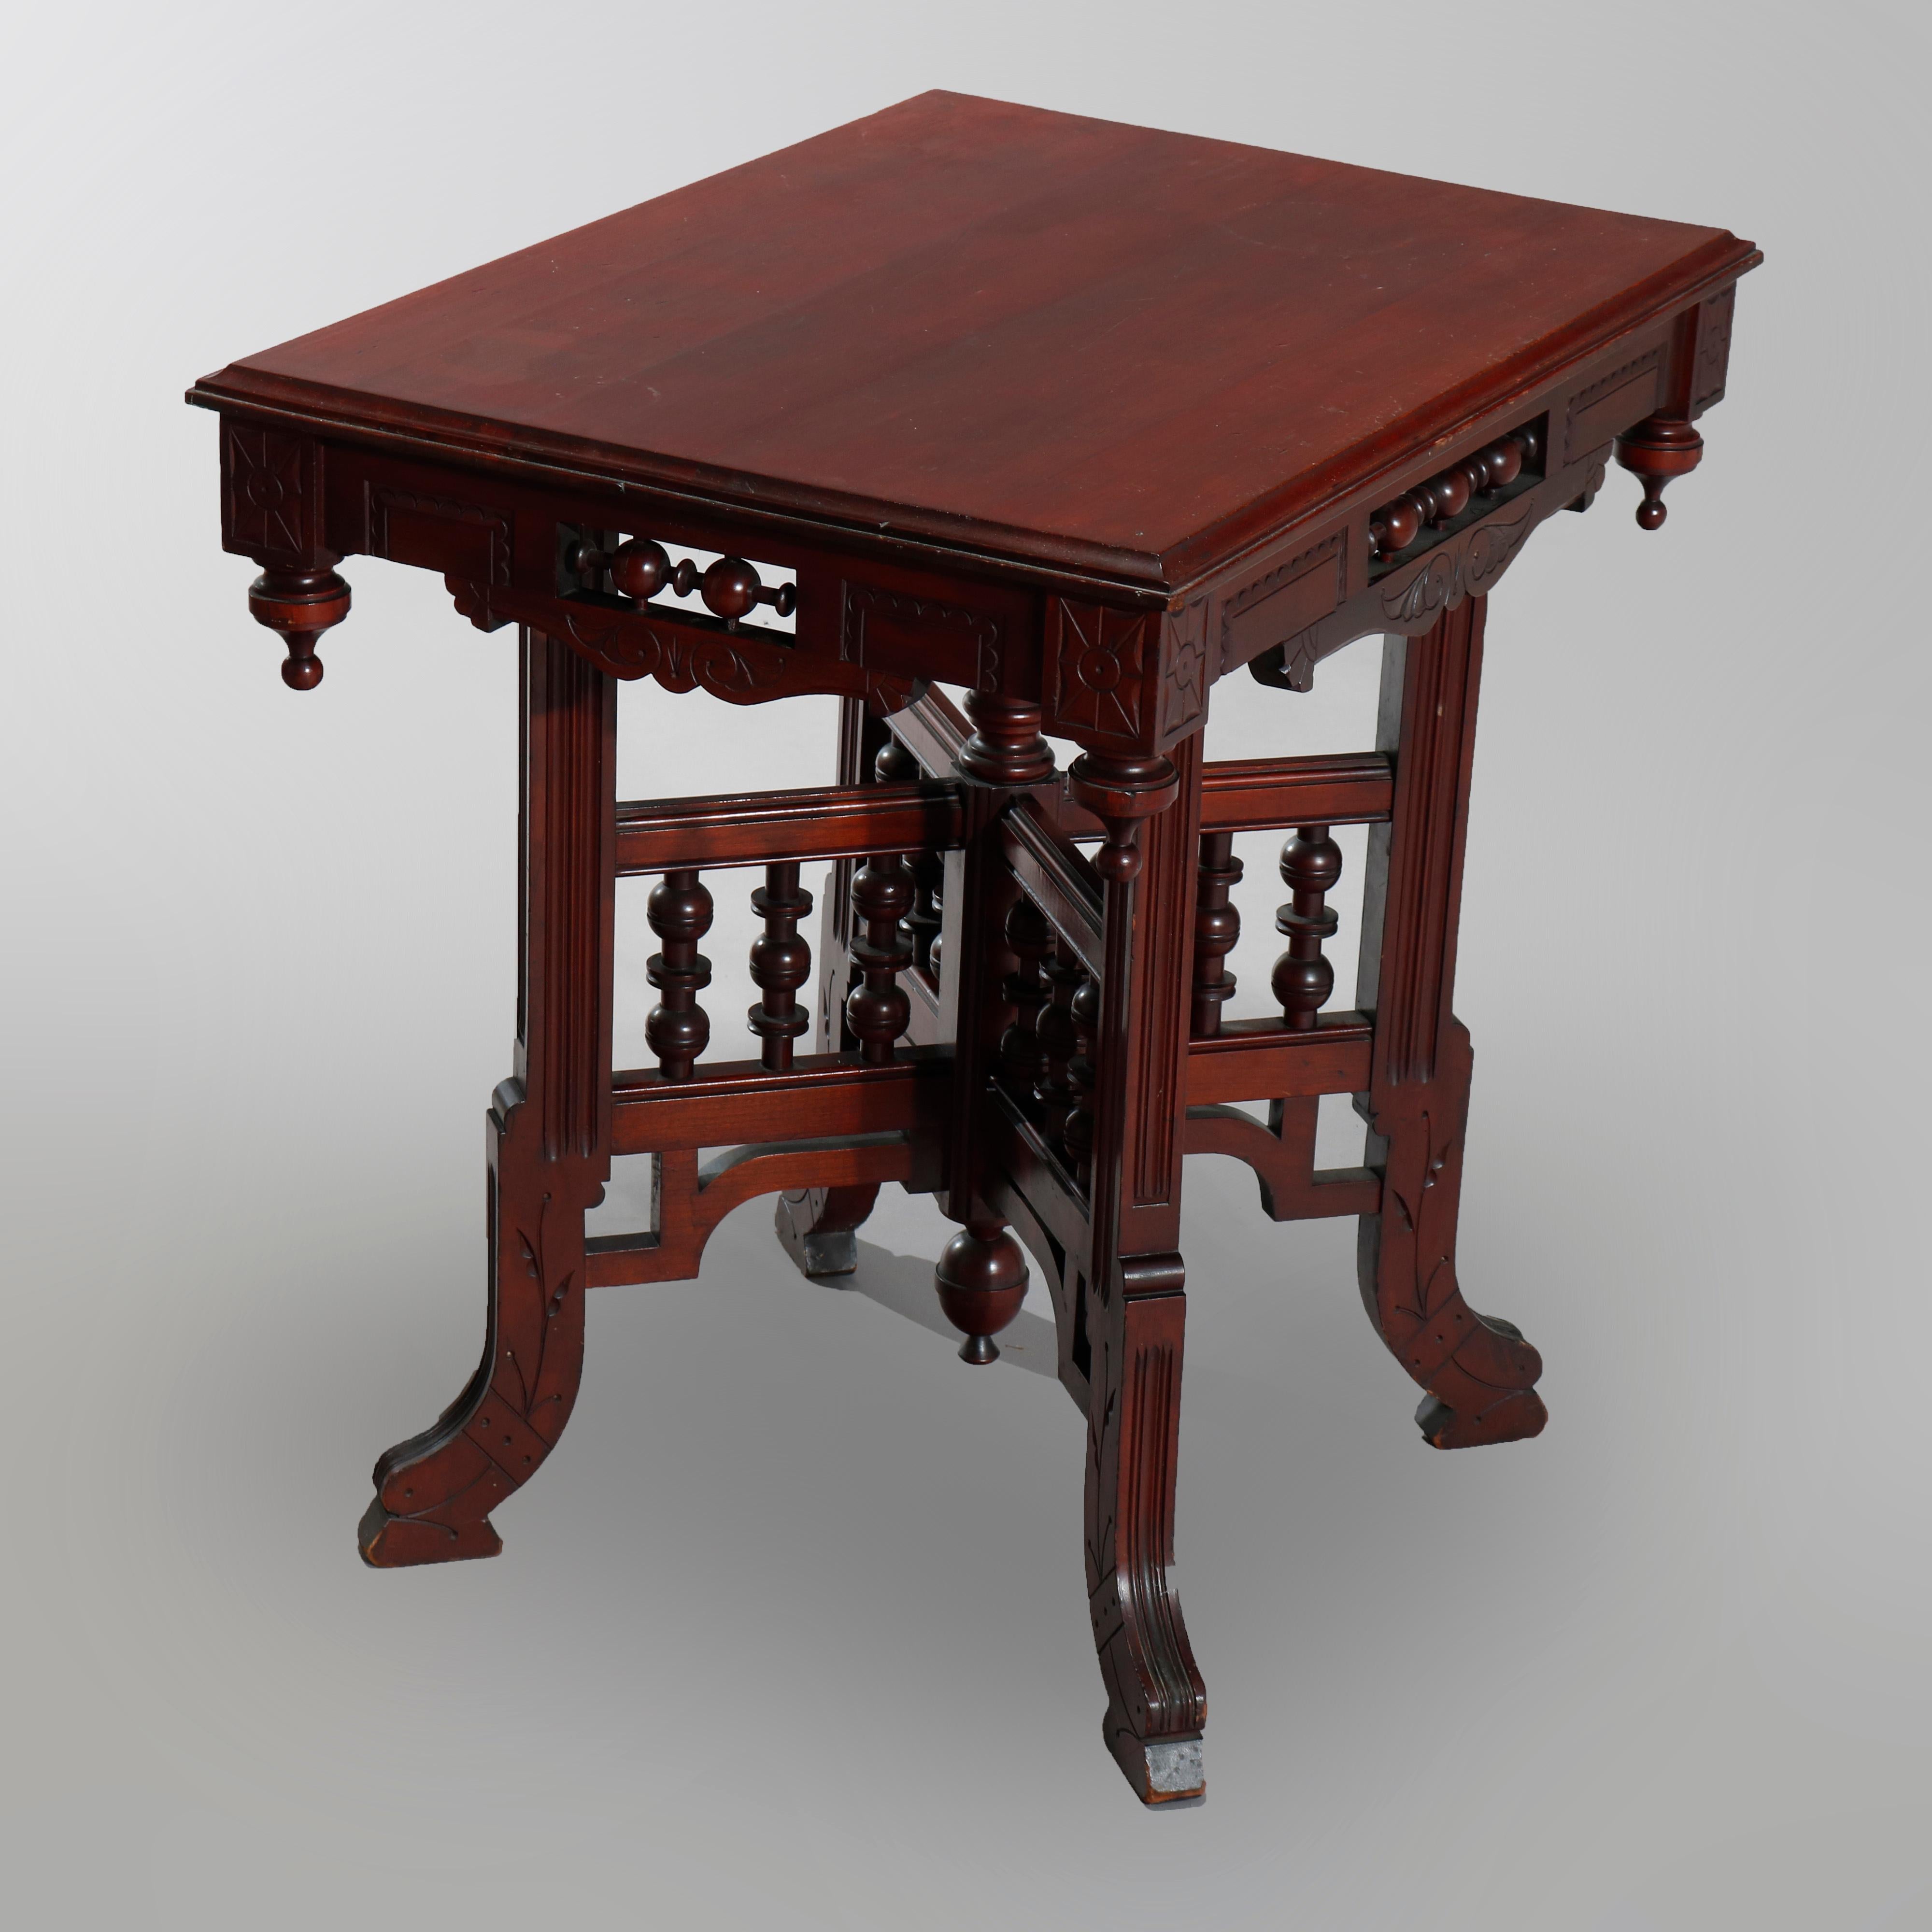 Carved Antique Eastlake Cherry Stick and Ball Parlor Lamp Table, circa 1890